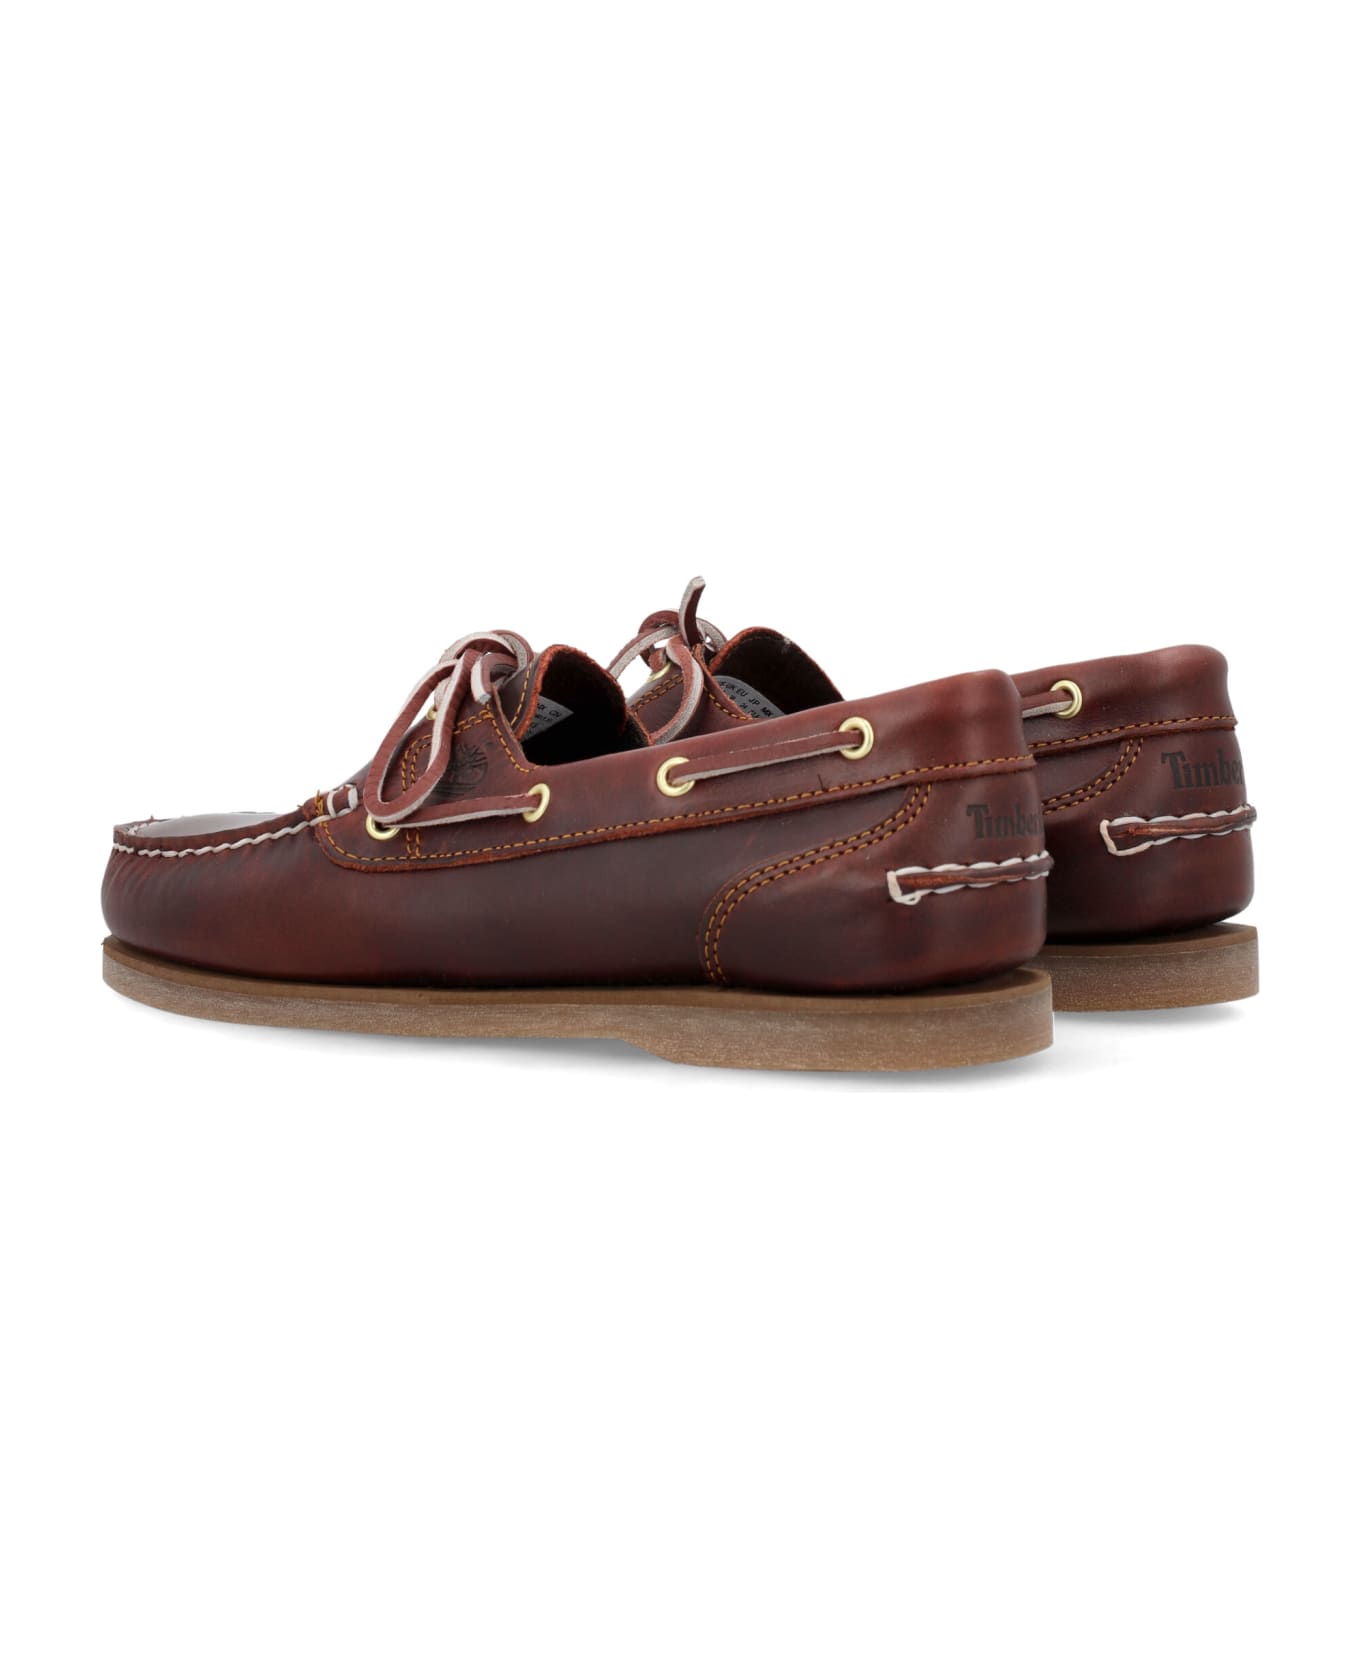 Timberland Classic Boat Shoe - MID BROWN